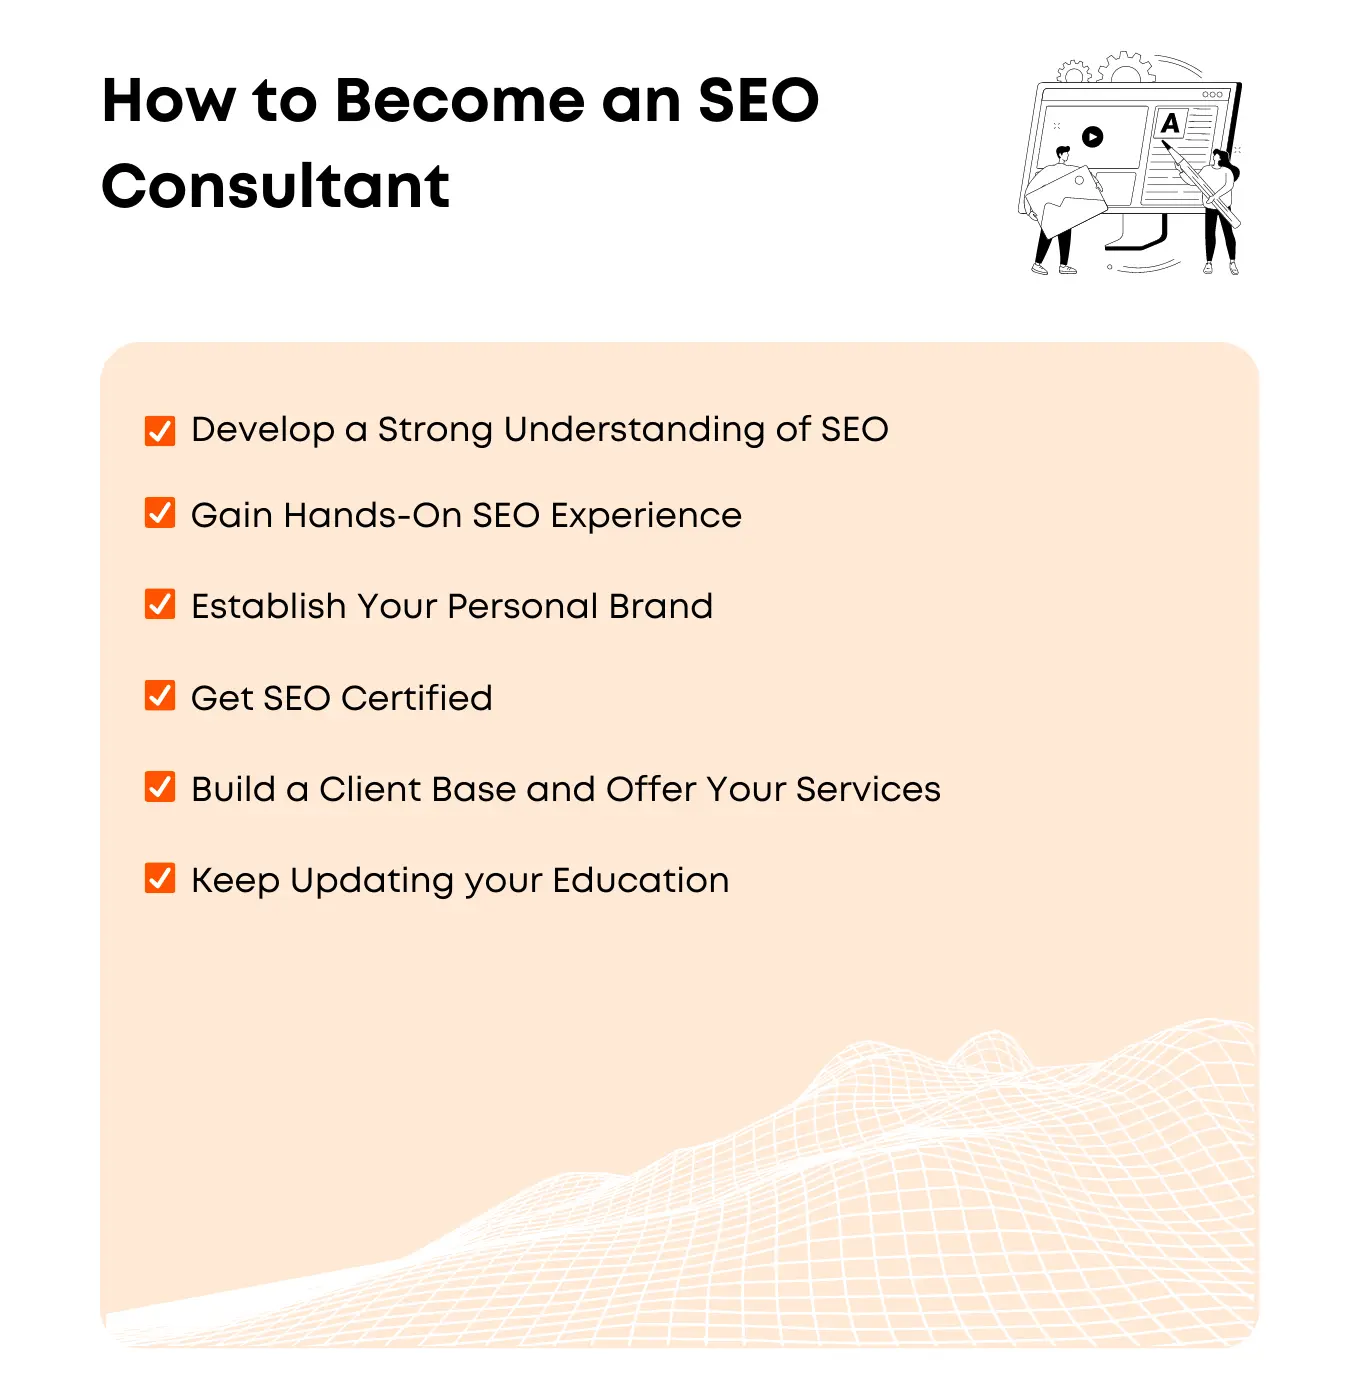 How to Become an SEO Consultant